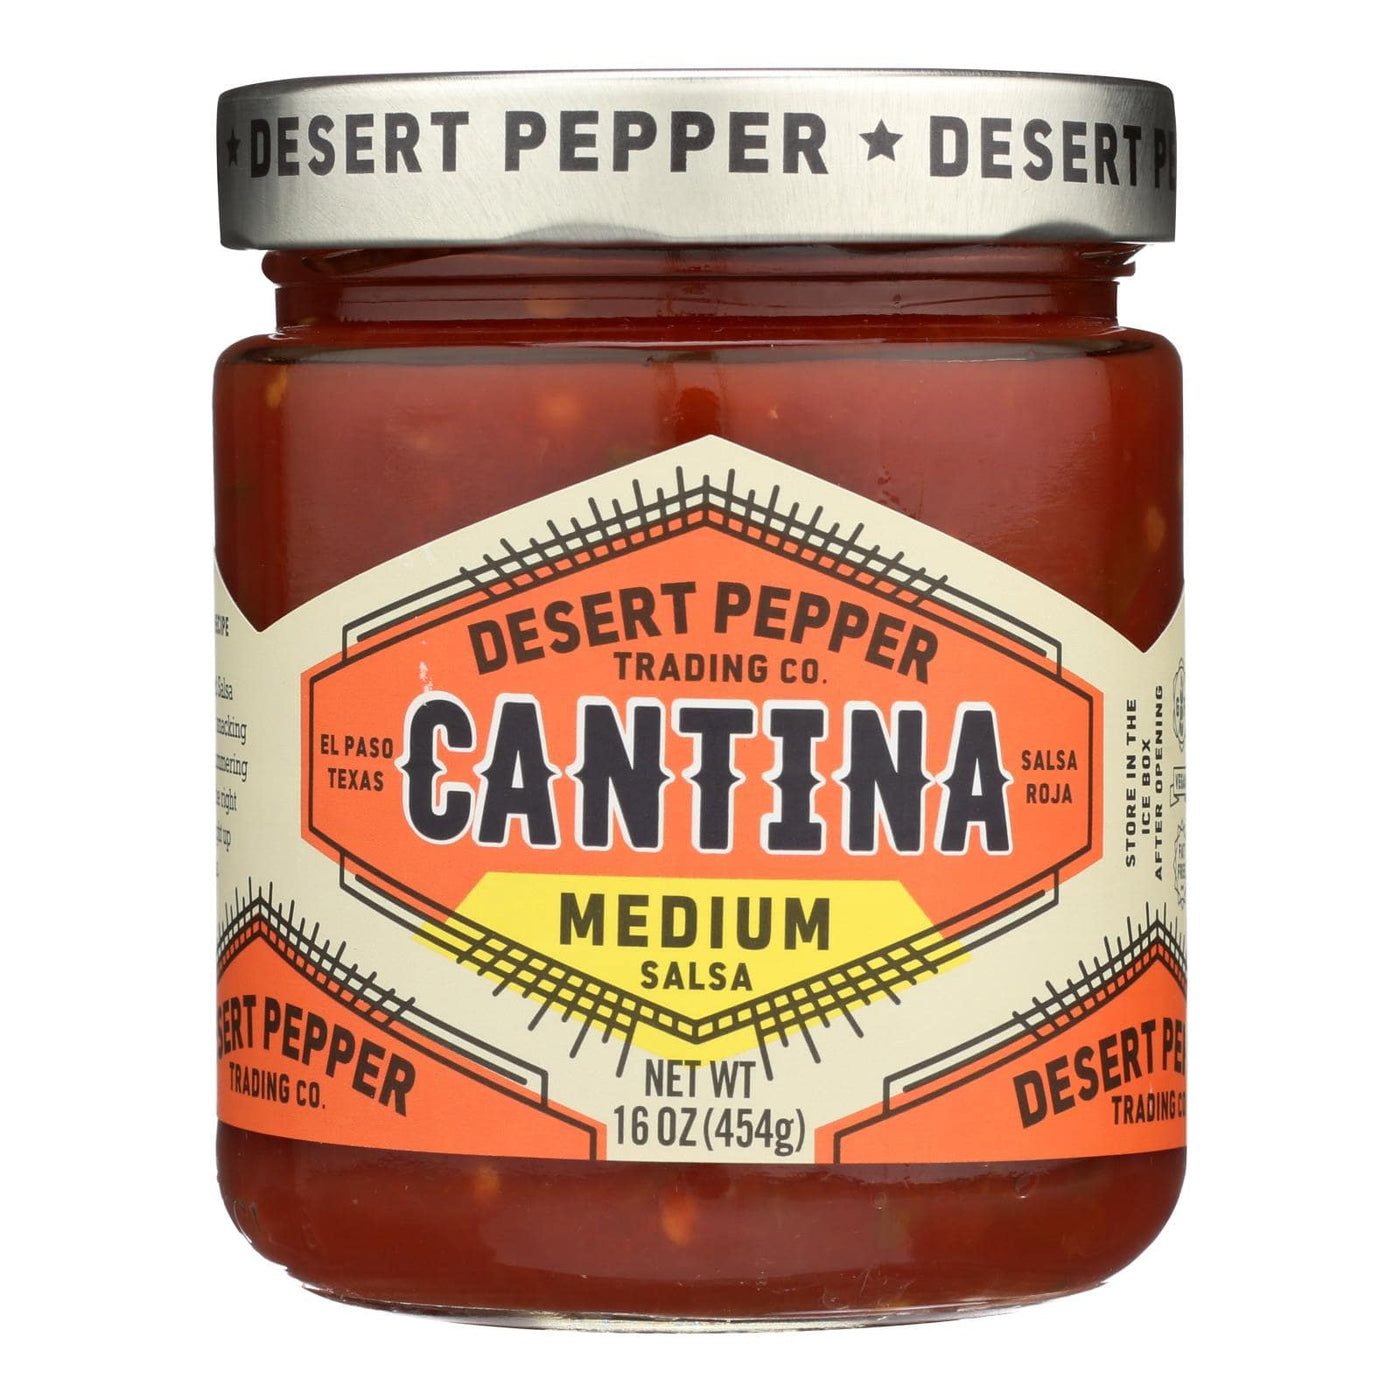 Buy Desert Pepper Trading - Cantina Salsa - Medium Red - Case Of 6 - 16 Oz  at OnlyNaturals.us